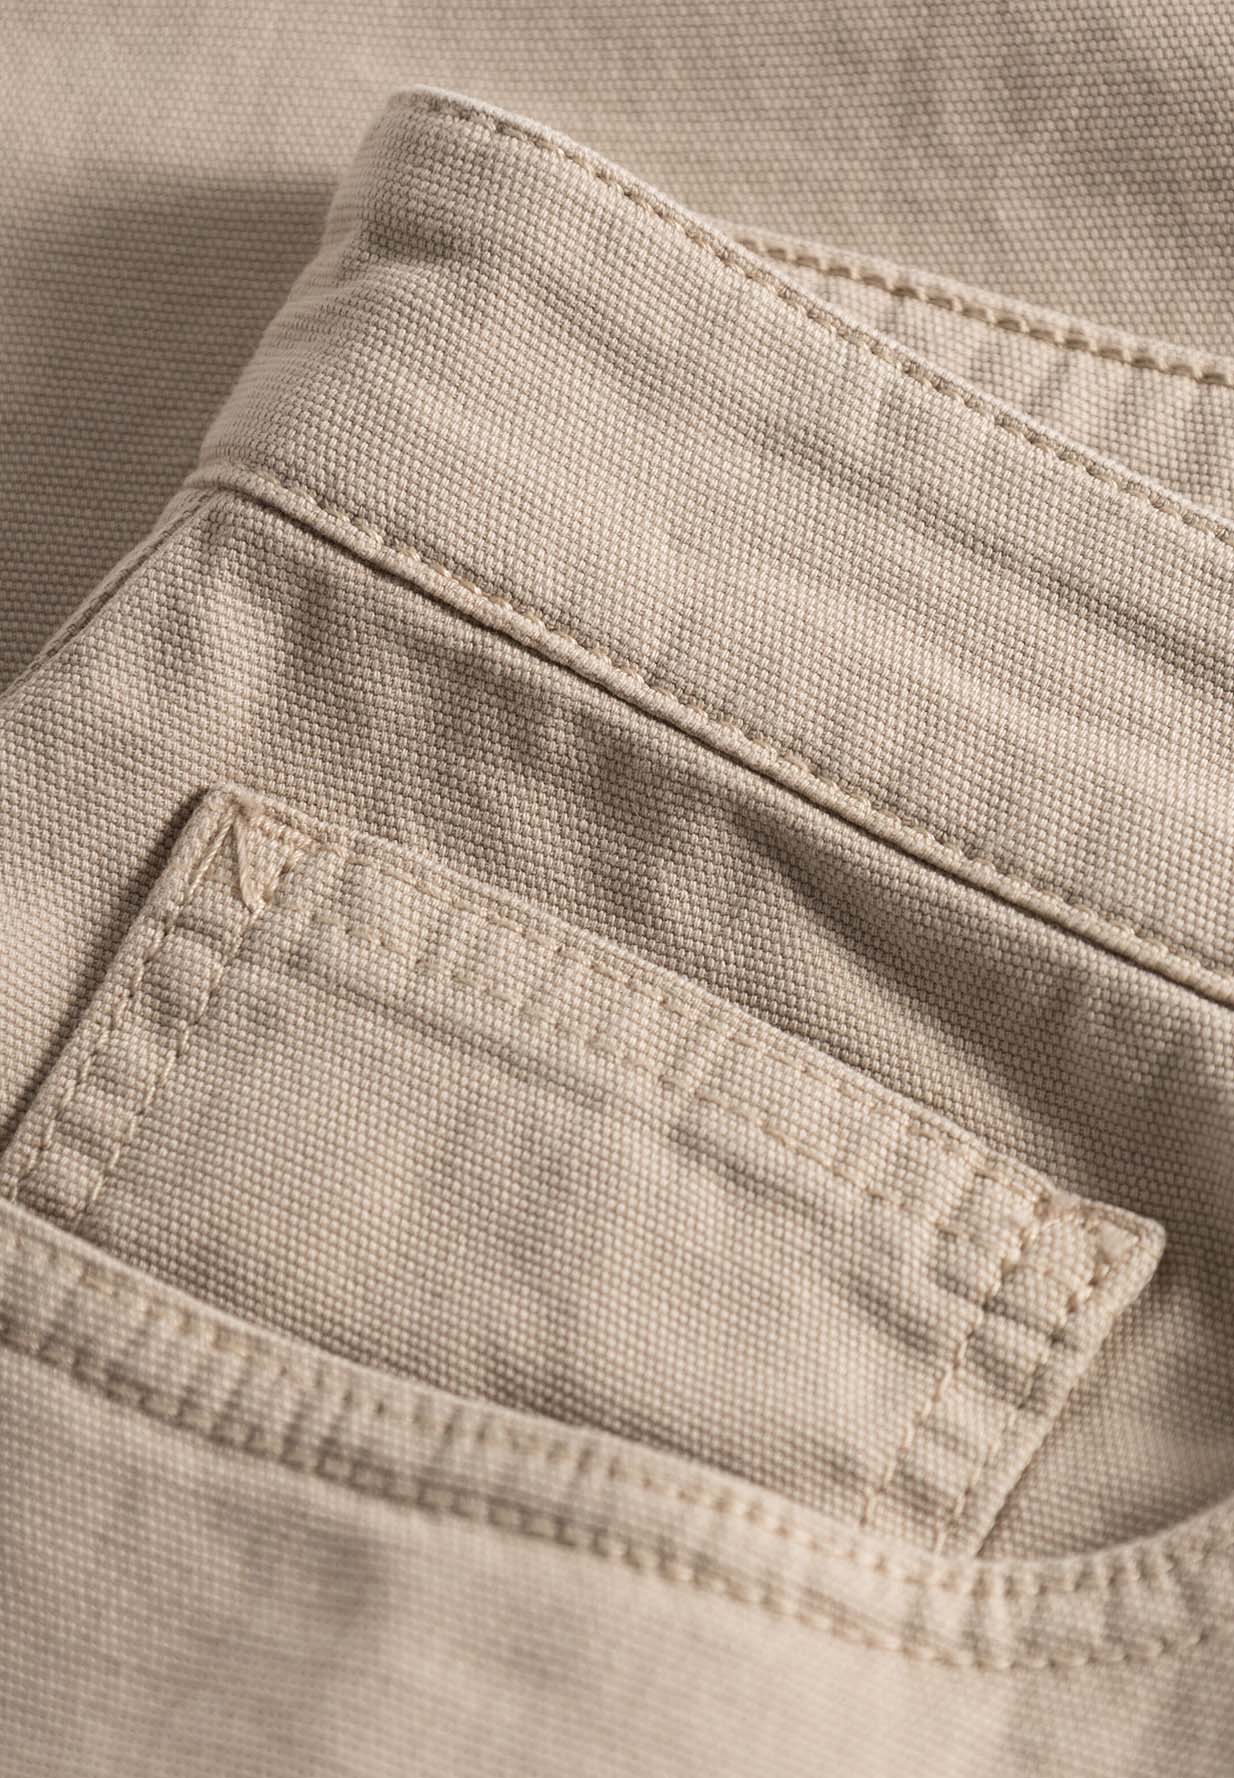 KNOWLEDGECOTTON APPAREL Loose 5-Pocket Canvas Twill Shorts light feather gray 33